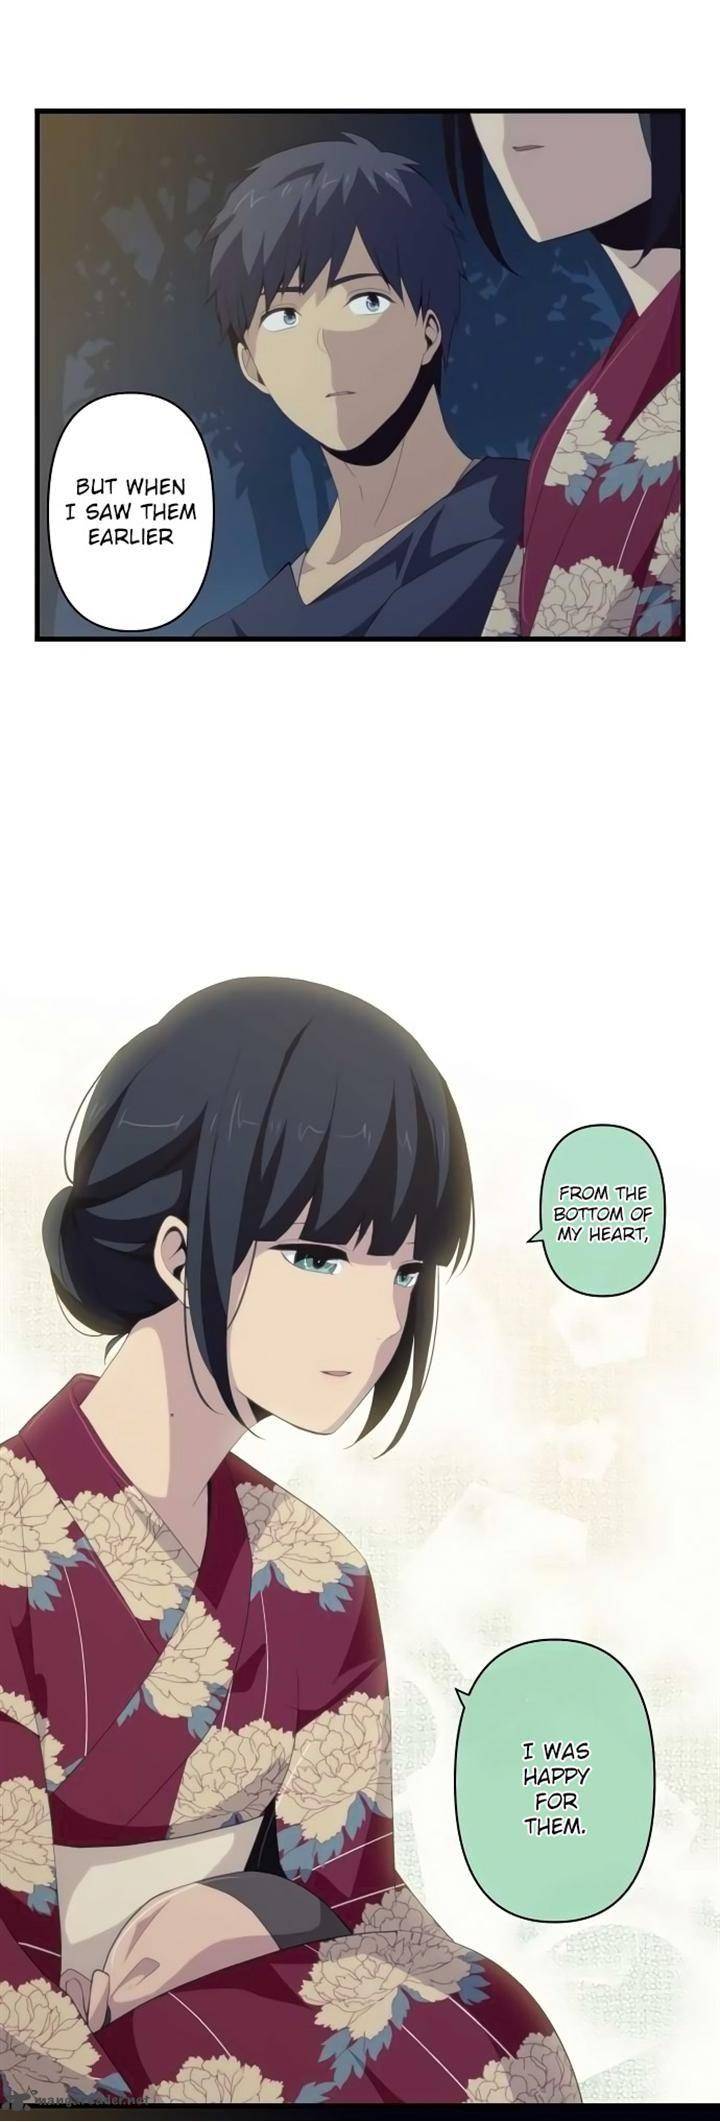 Relife 107 5